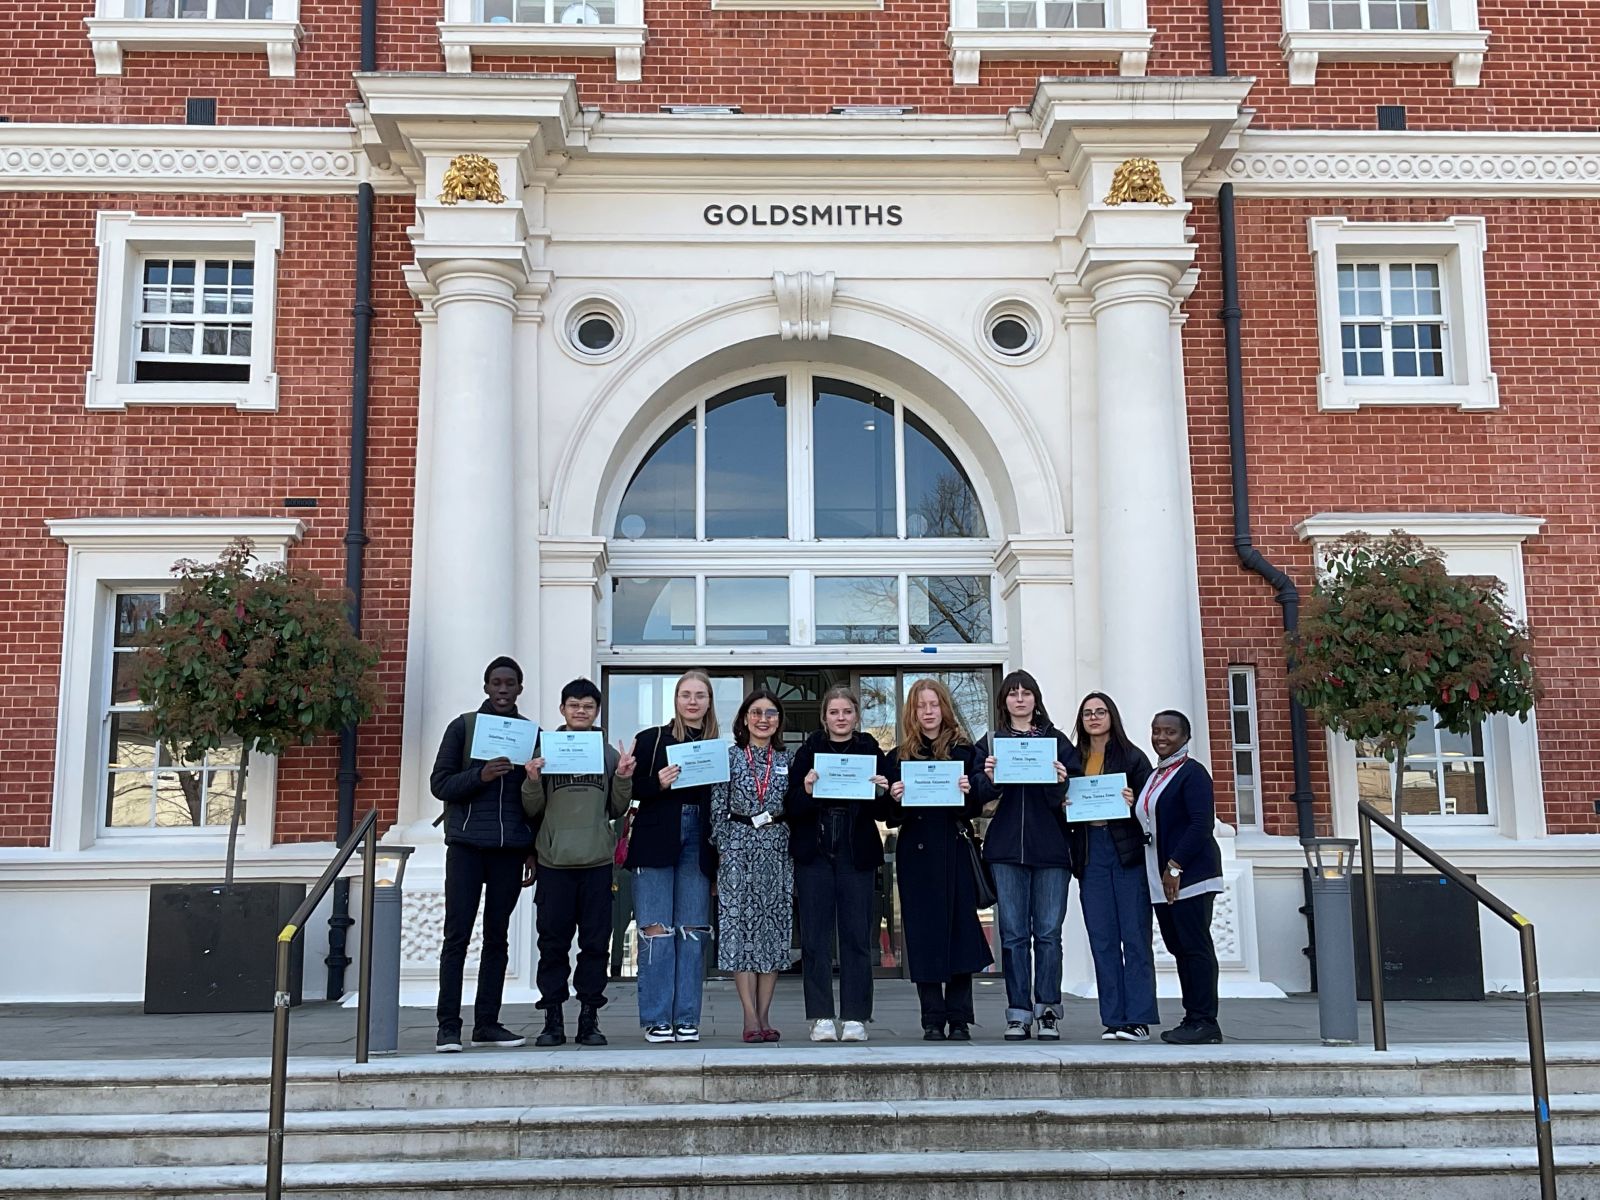 Students from East Surrey College outside Goldsmith's University